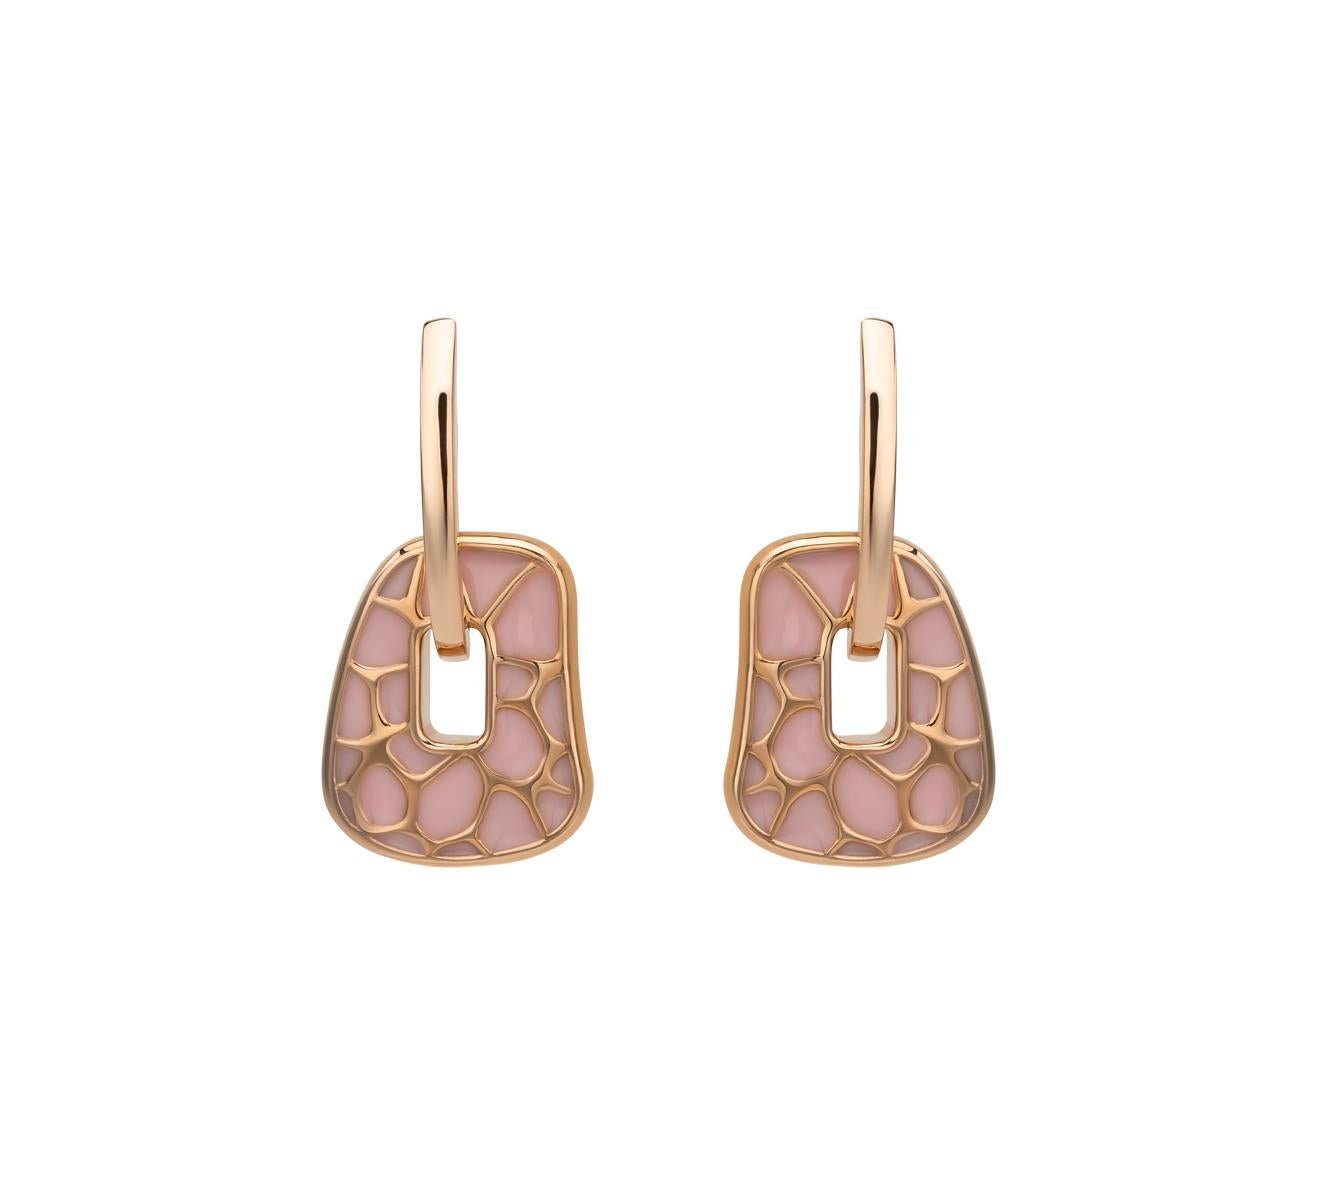 Mattioli Puzzle Safari Small 18K Rose Gold Earrings Pink Enamel and 2 Pendants
Hoops in Rose Gold.
Measure 15x18mm or 0,59x0,70 in
Puzzle pendants of mother of pearl you can choose between 25 colour palette

READY TO SHIP
*Shipment of this piece is